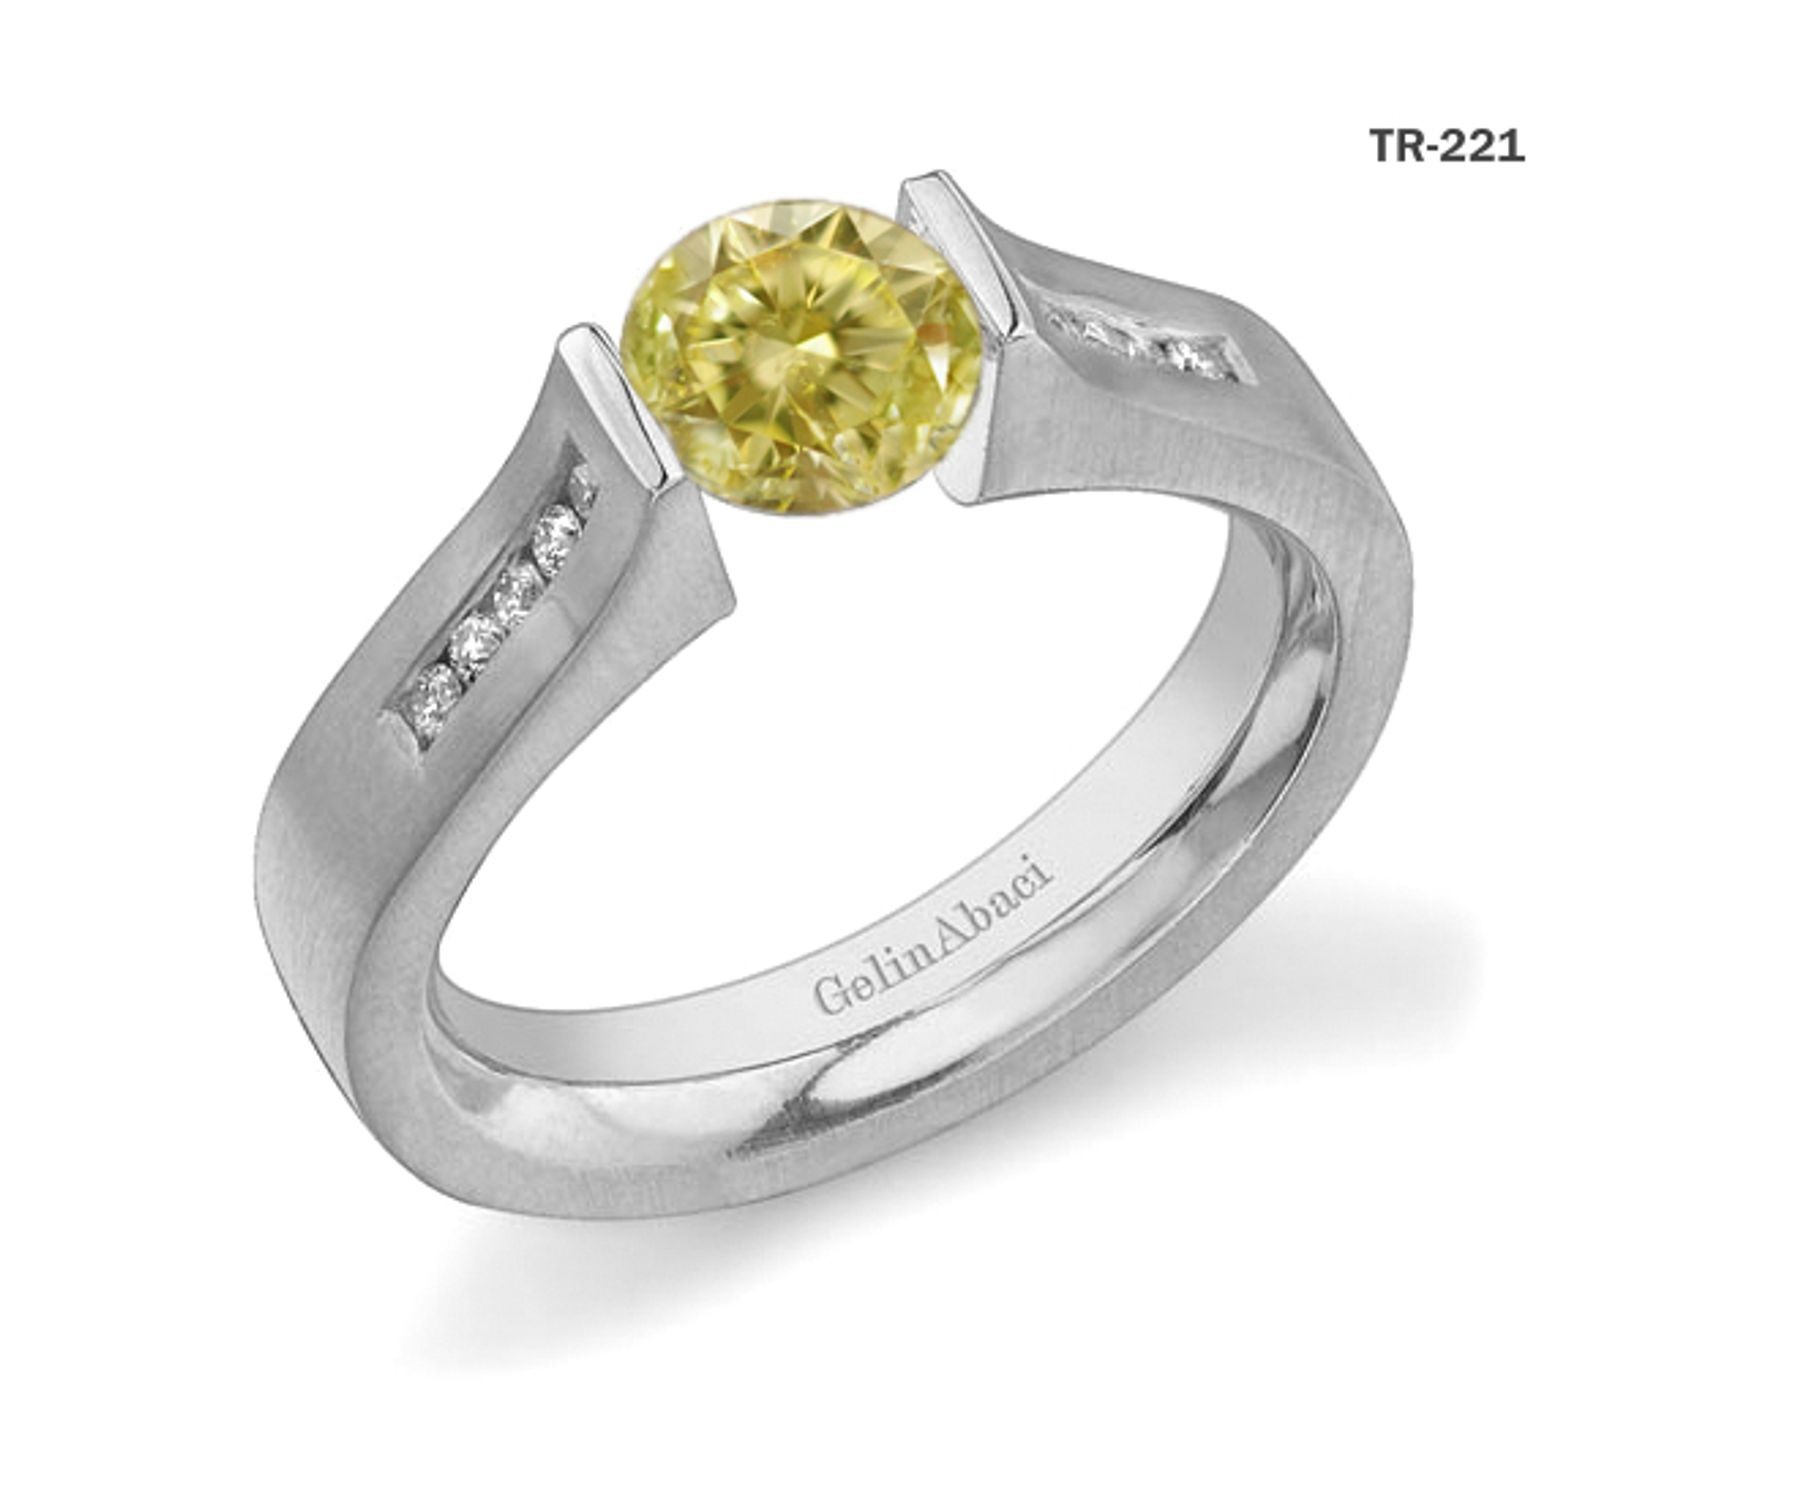 Contemporary High Quality Designer Yellow Colored Diamond Tension Set Engagement Rings